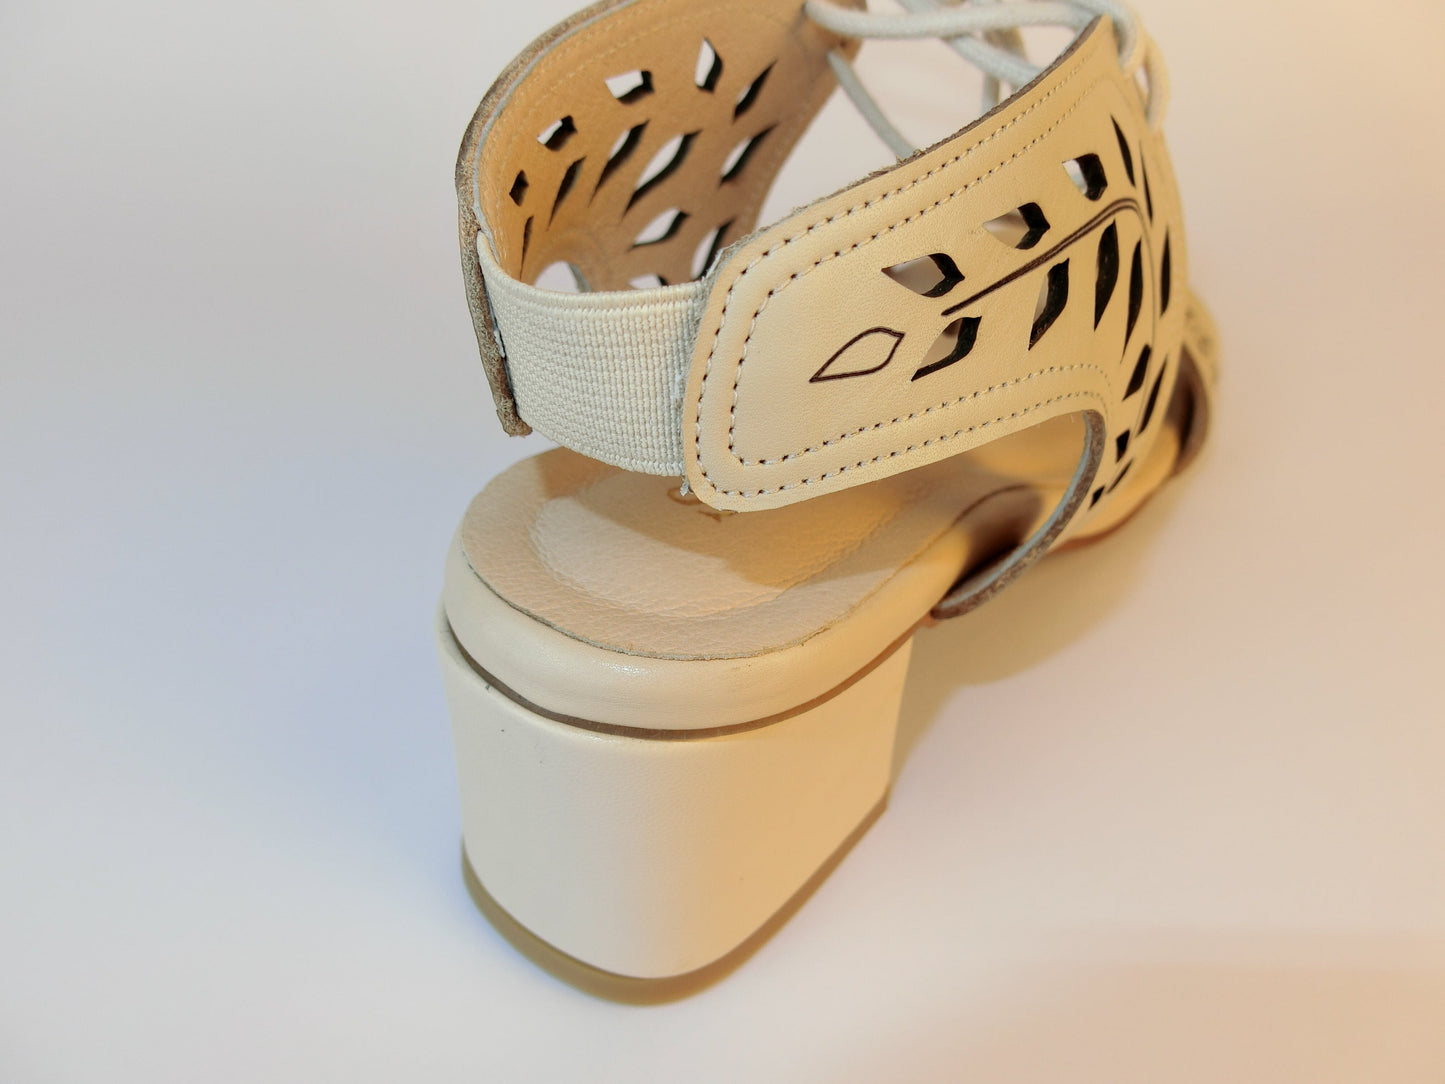 SS21002 Leather laser cut block heel sandals in Tan and Beige sandals Sam Star Shoes 